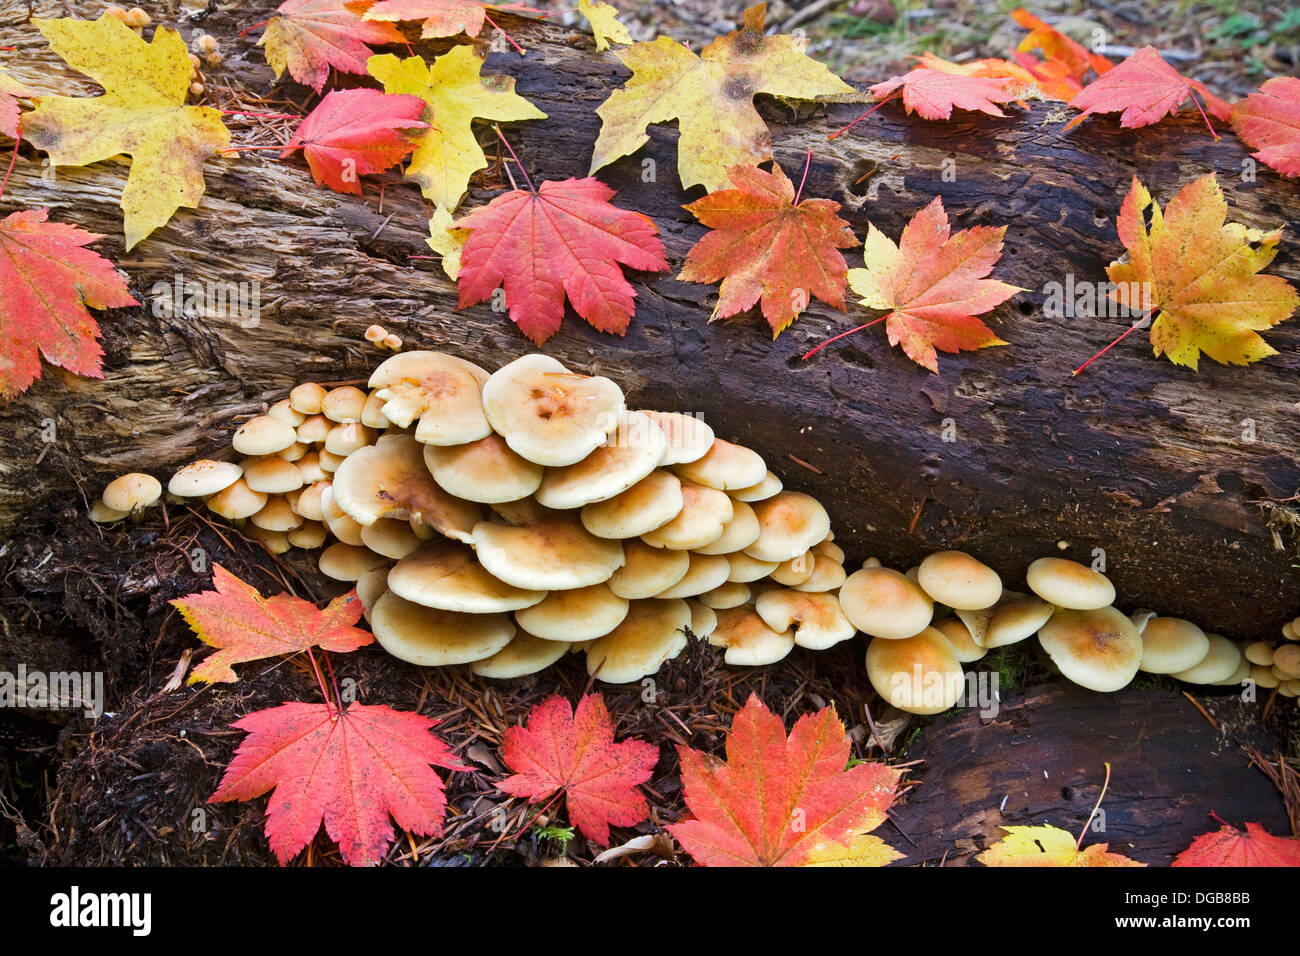 Hypholoma fasciculare mushrooms on an old conifer log in October, in the Pacific Northwest Stock Photo